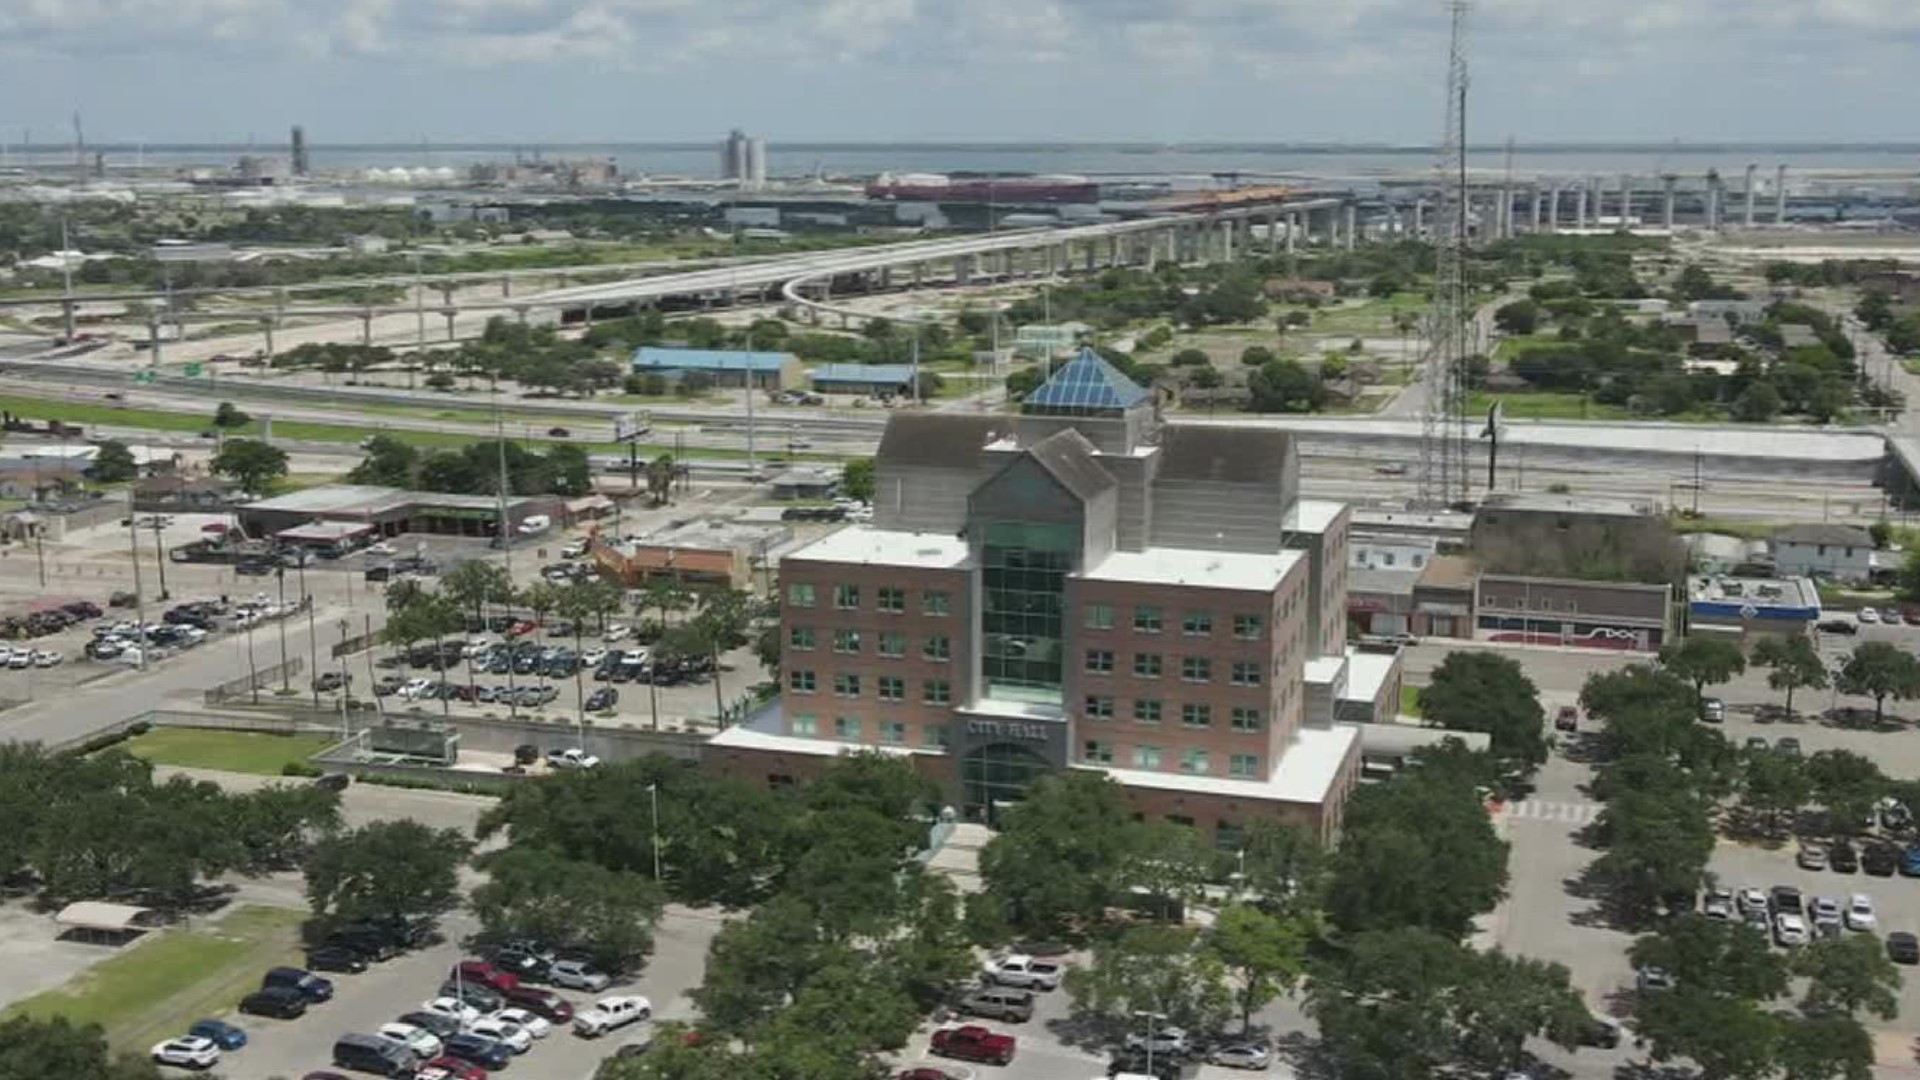 The City of Corpus Christi has set Jan. 18, 2022, as the deadline to set up its own health department separate from Nueces County.